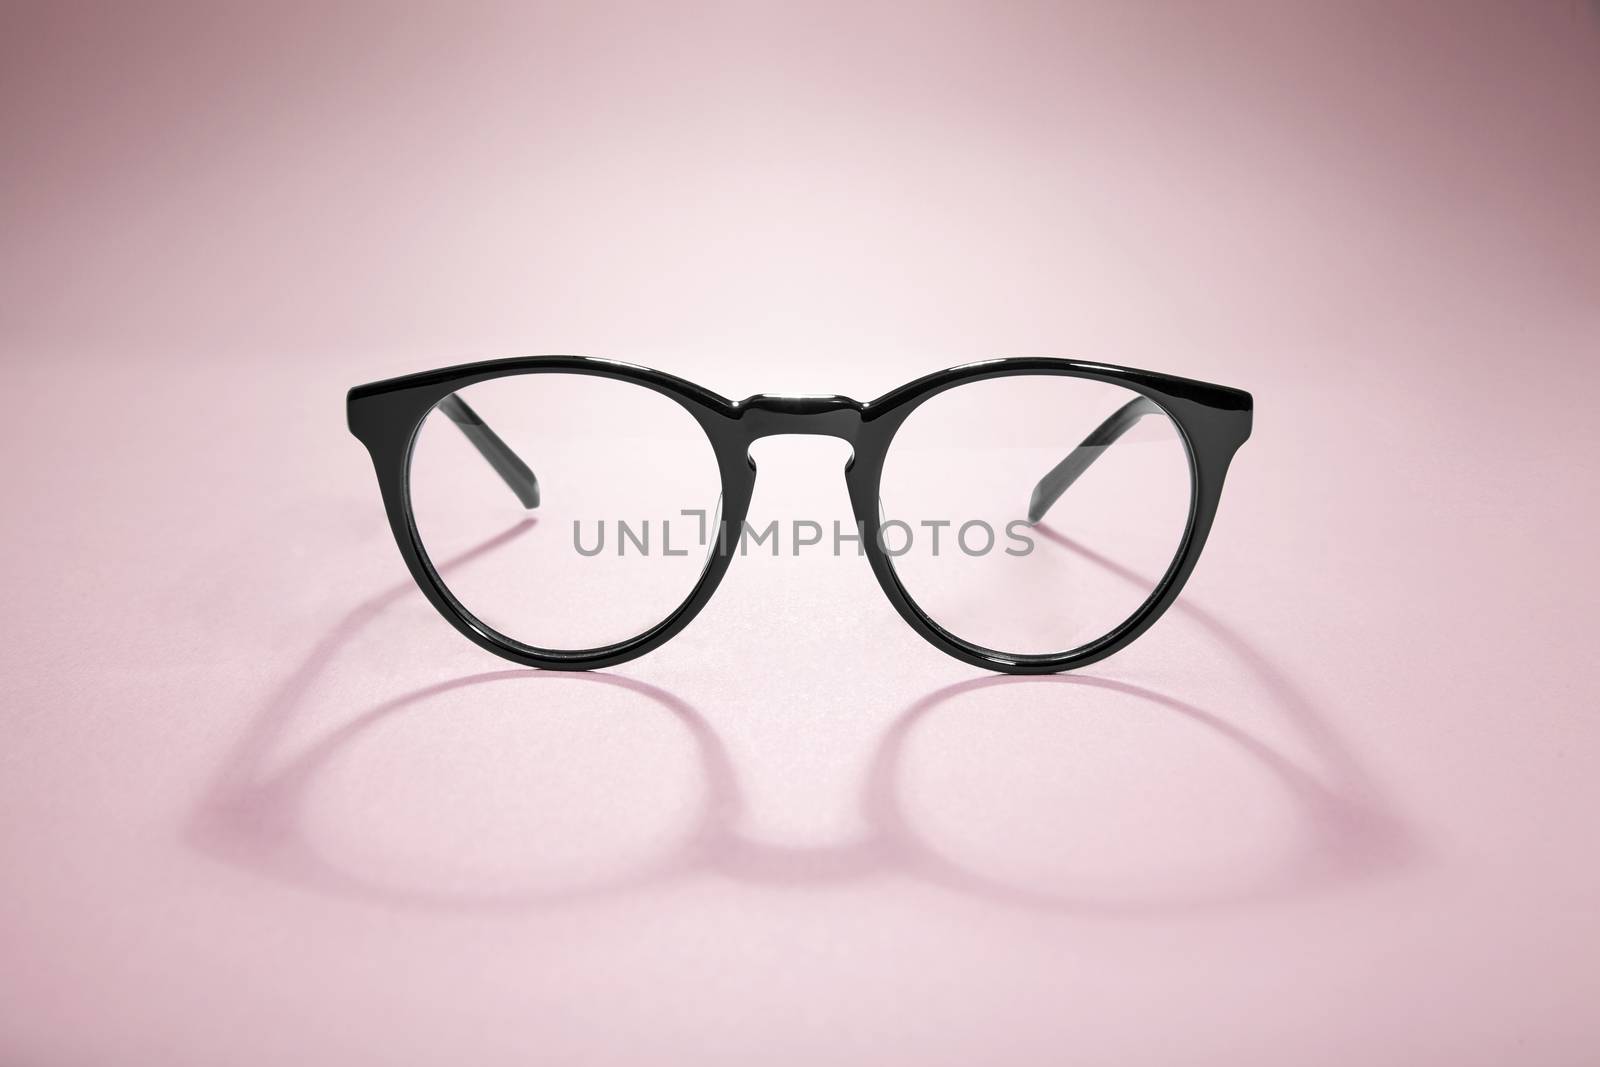 Studio shot of black glasses with long shadow at pink background.